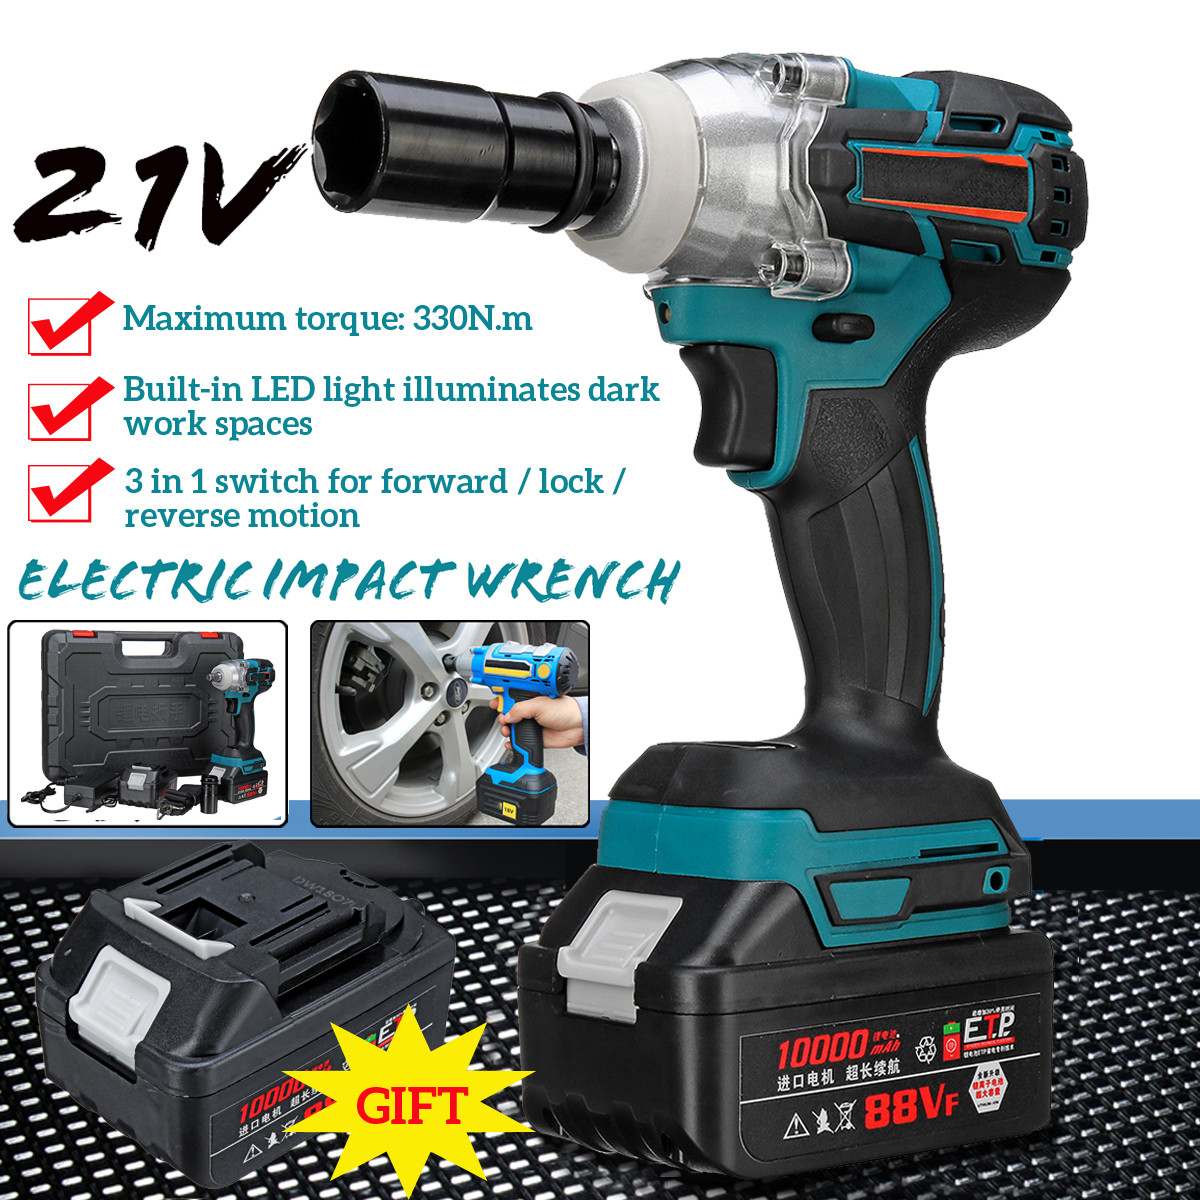 21V-330Nm-10000mAh-Lithium-Electric-Impact-Wrench-Cordless-with-2-Batteries-1399342-4